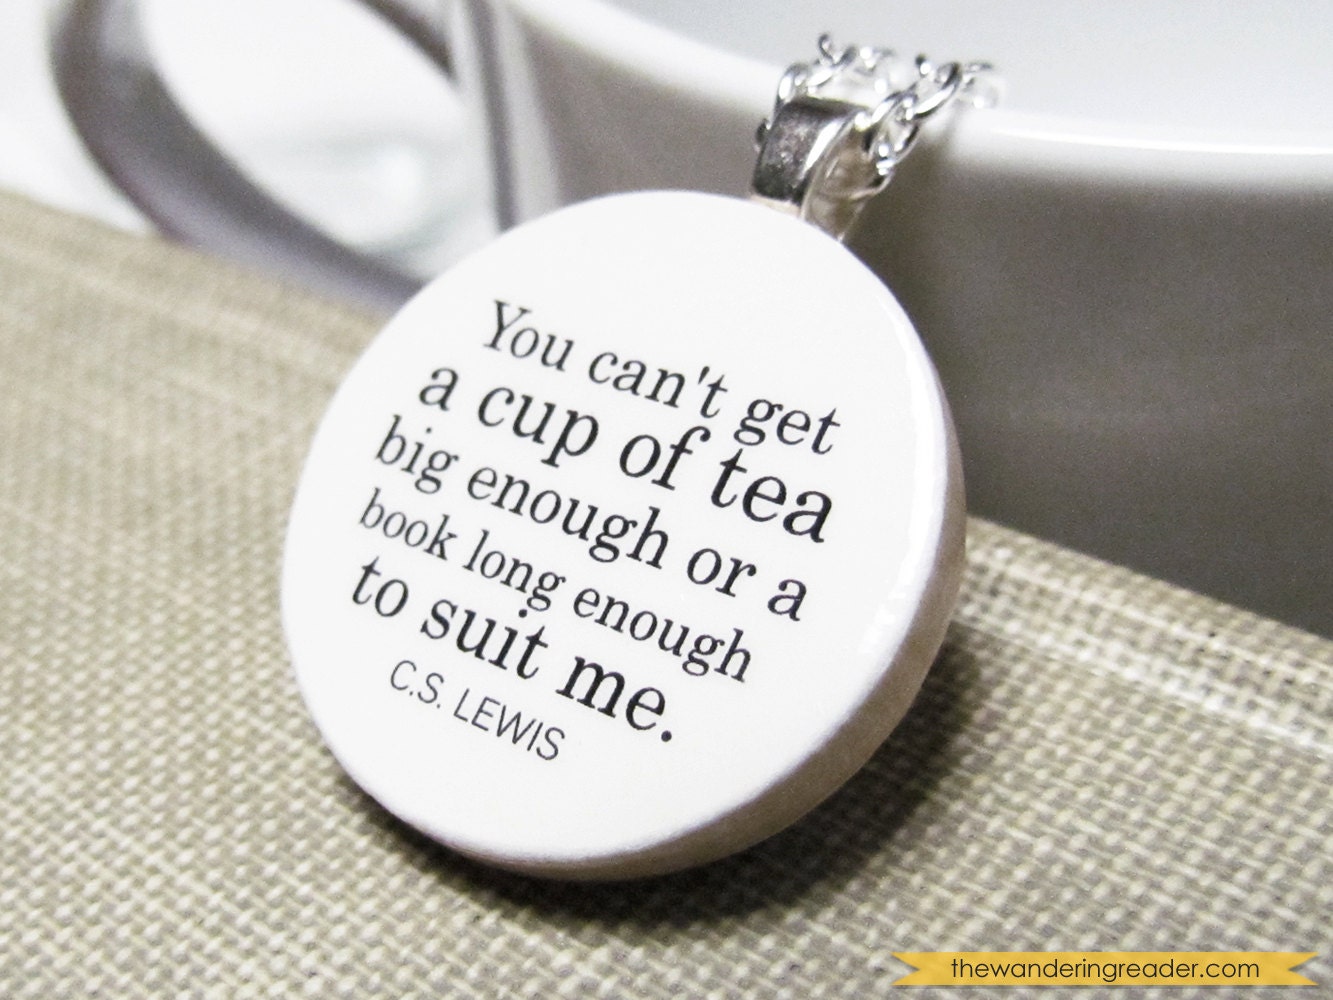 C. S. Lewis "You can't get a cup of tea big enough or a book long enough to suit me" Book Lover Quote Necklace